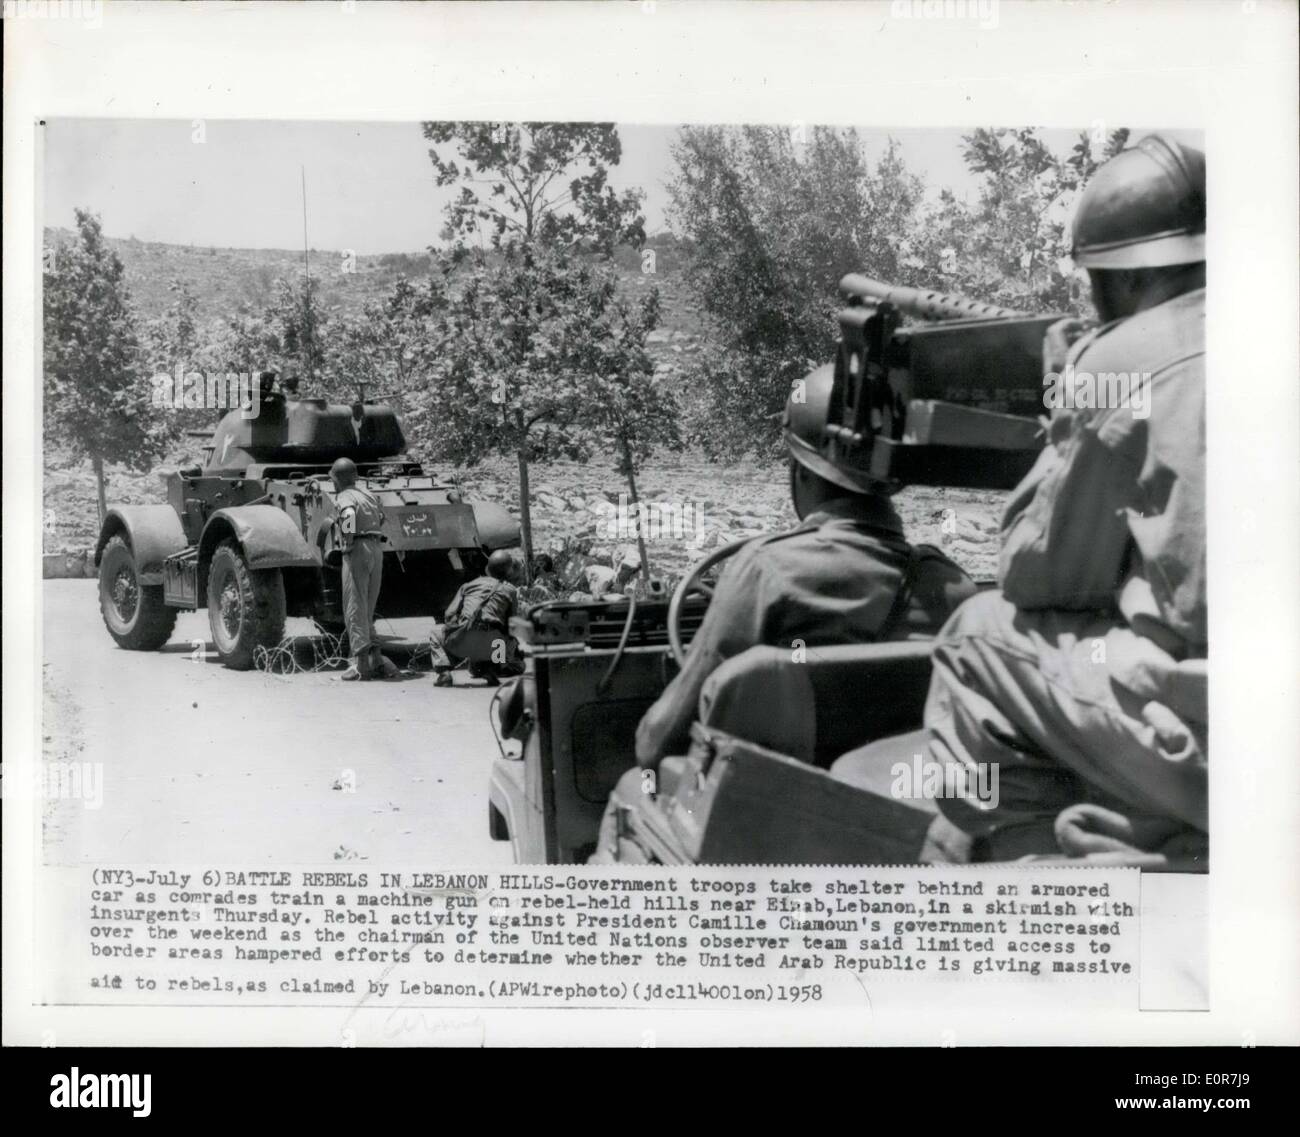 Jul. 06, 1958 - Battle Rebels In Lebanon Hills - Government troops take shelter behind an armored car as comrades train a machine gun on rebel - held hills near Einab, Lebanon, in a skirmish with insurgents Thursday. Rebel activity against President Camille Chamoun's government increased over the weekend as the chairman of the United Nations observer team said limited access to border areas hampered efforts to determine whether the United Arab Republic is giving massive aid to rebels, as claimed by Lebanon. Stock Photo